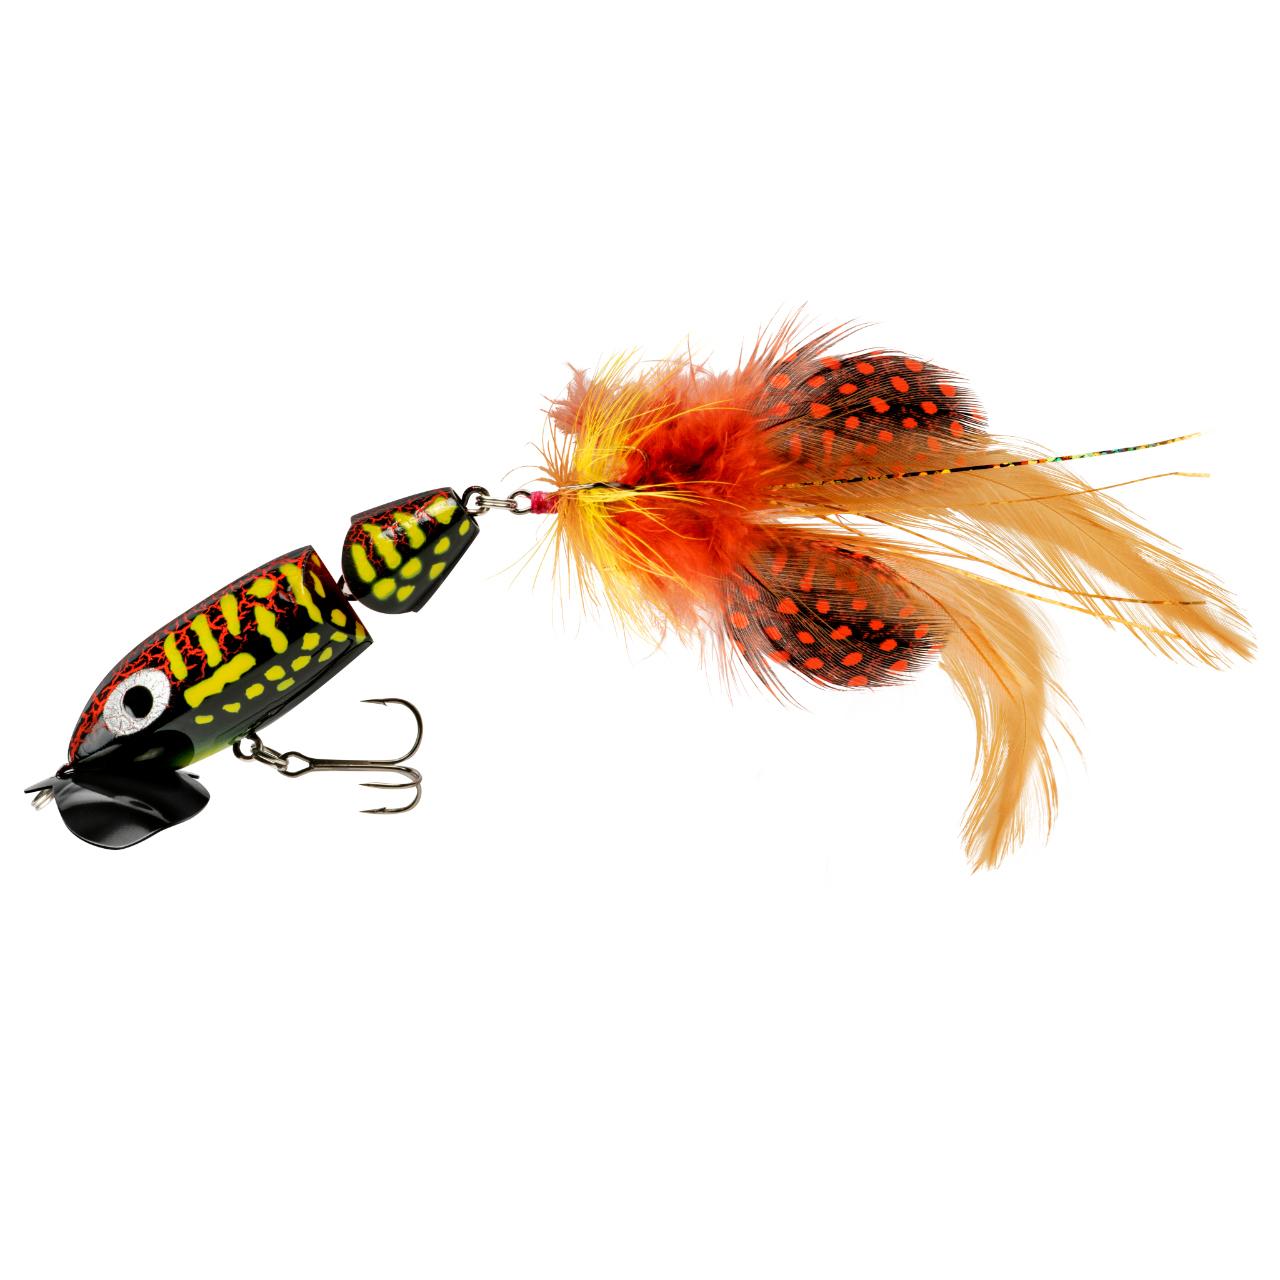 Arbogast G621-538 Jointed Jitterbug 2.0, 2 1/2", 3/8oz, #6 feather